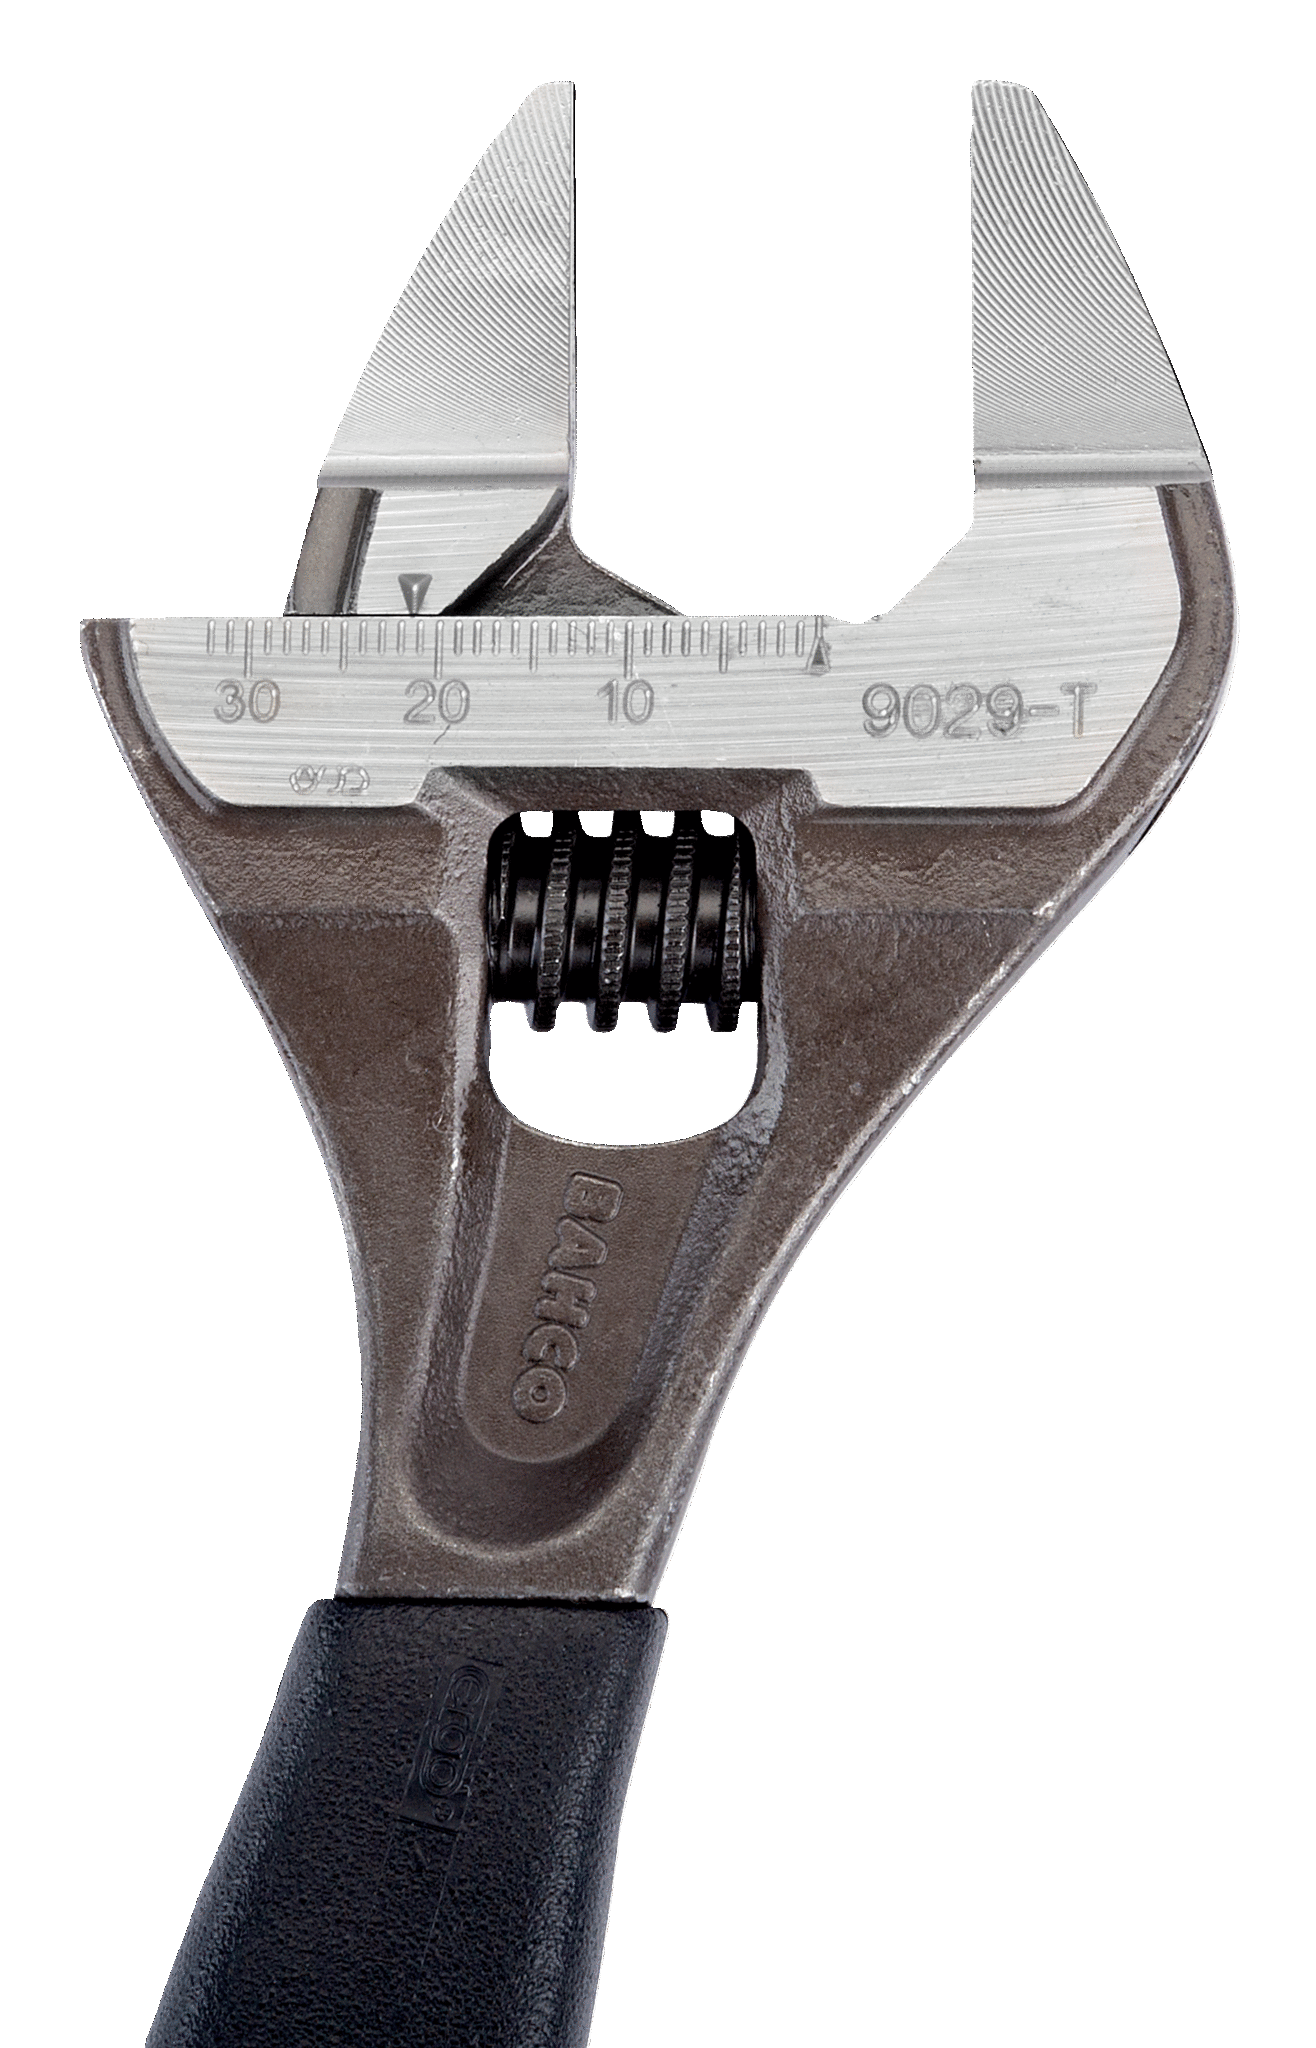 ERGO™ Central Nut Wide Opening Thin Jaw Adjustable Wrenches with Rubber Handle - 9029-T by Bahco